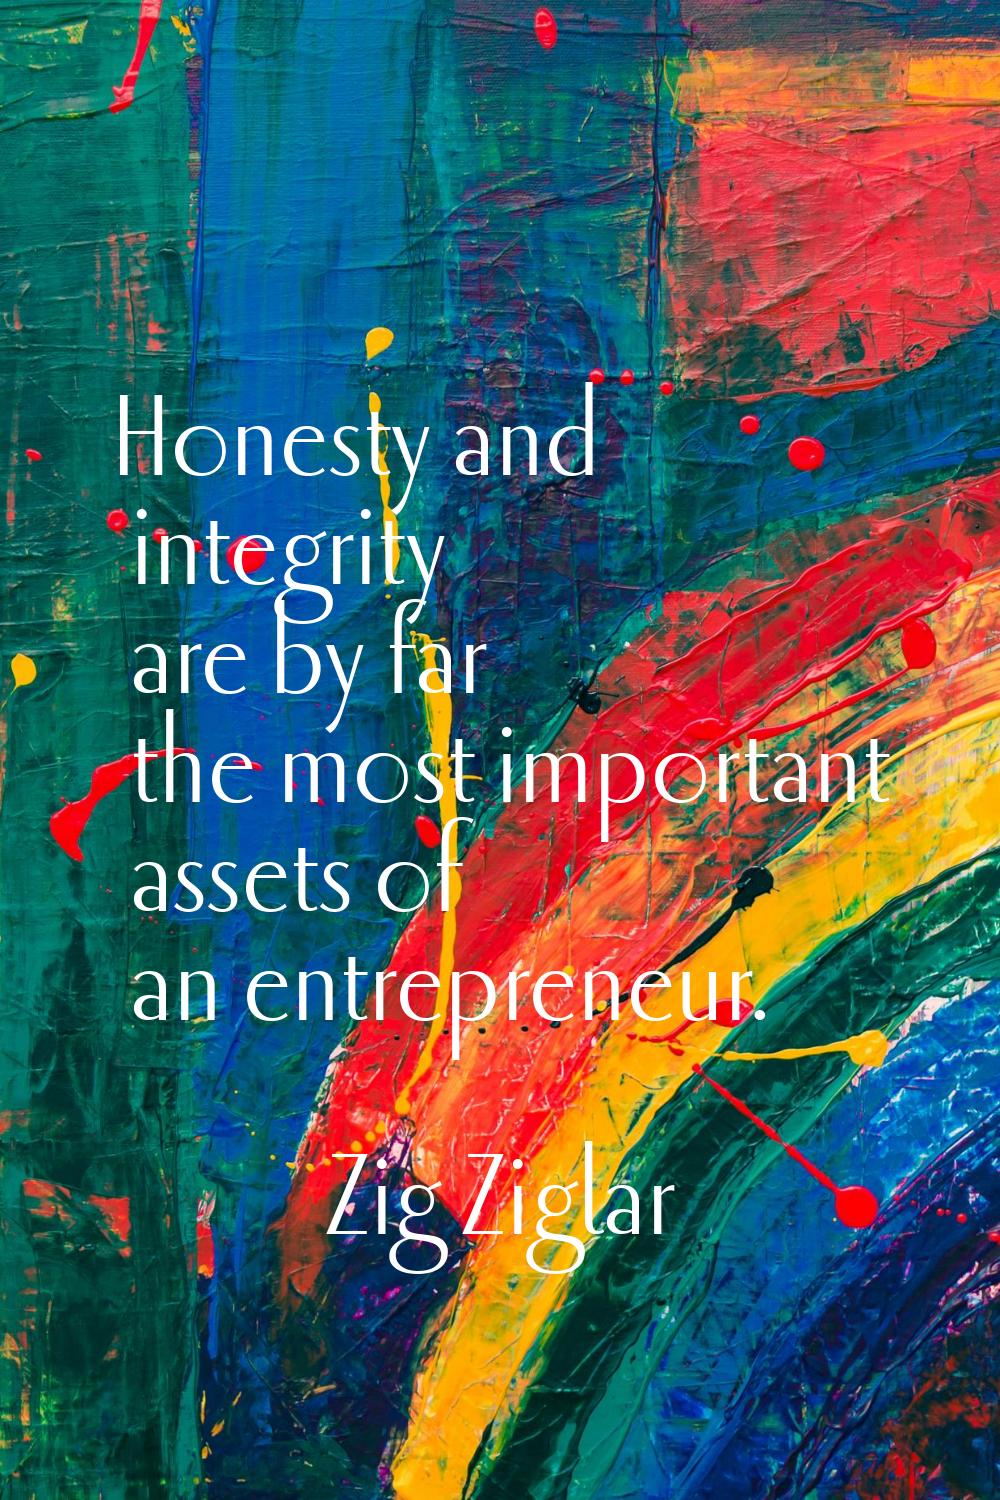 Honesty and integrity are by far the most important assets of an entrepreneur.